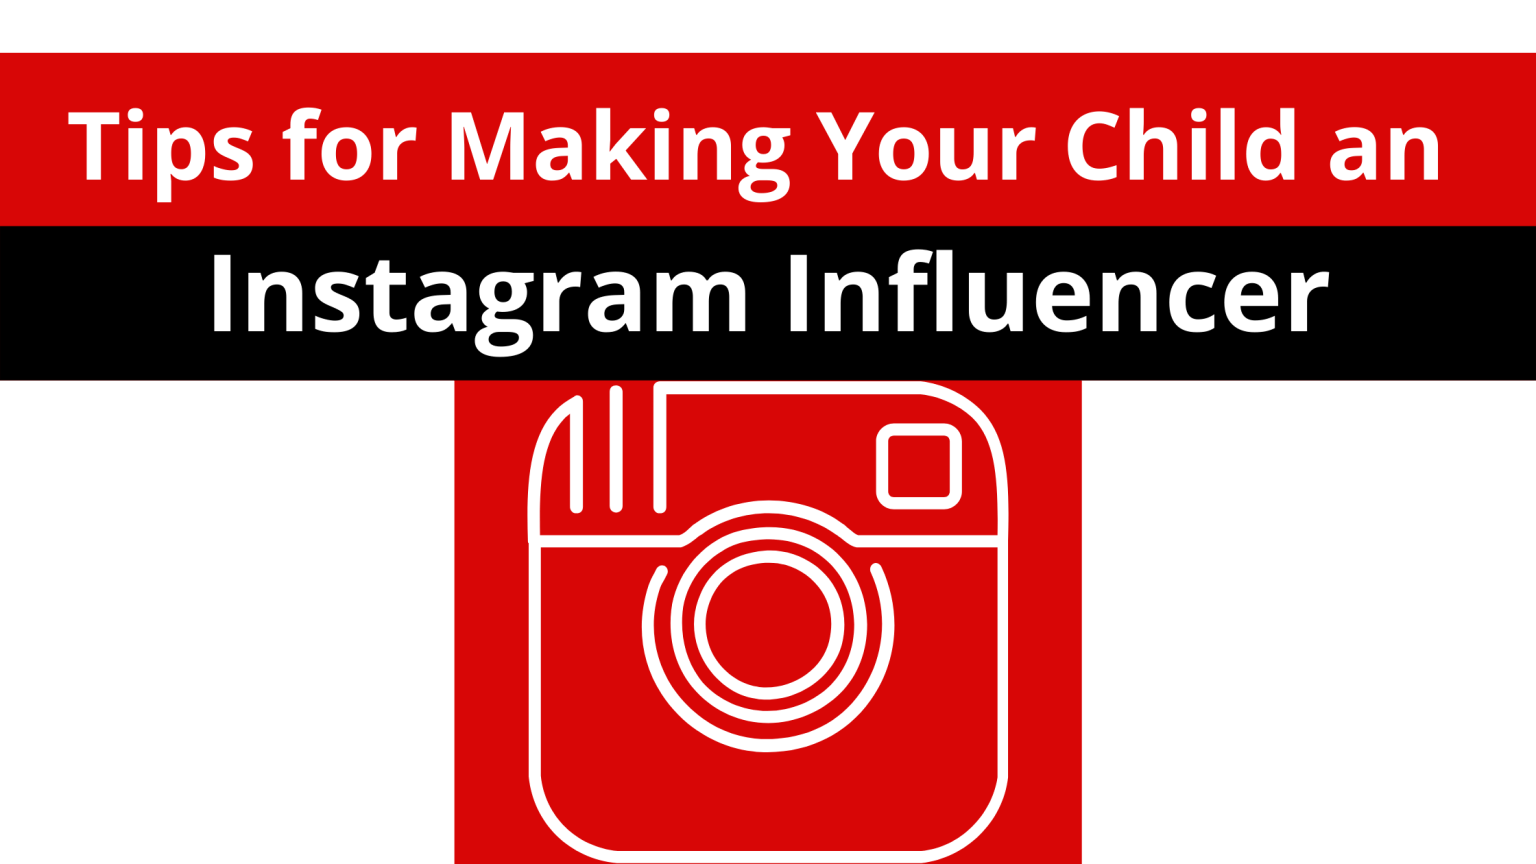 Tips for Making Your Child an Instagram Influencer